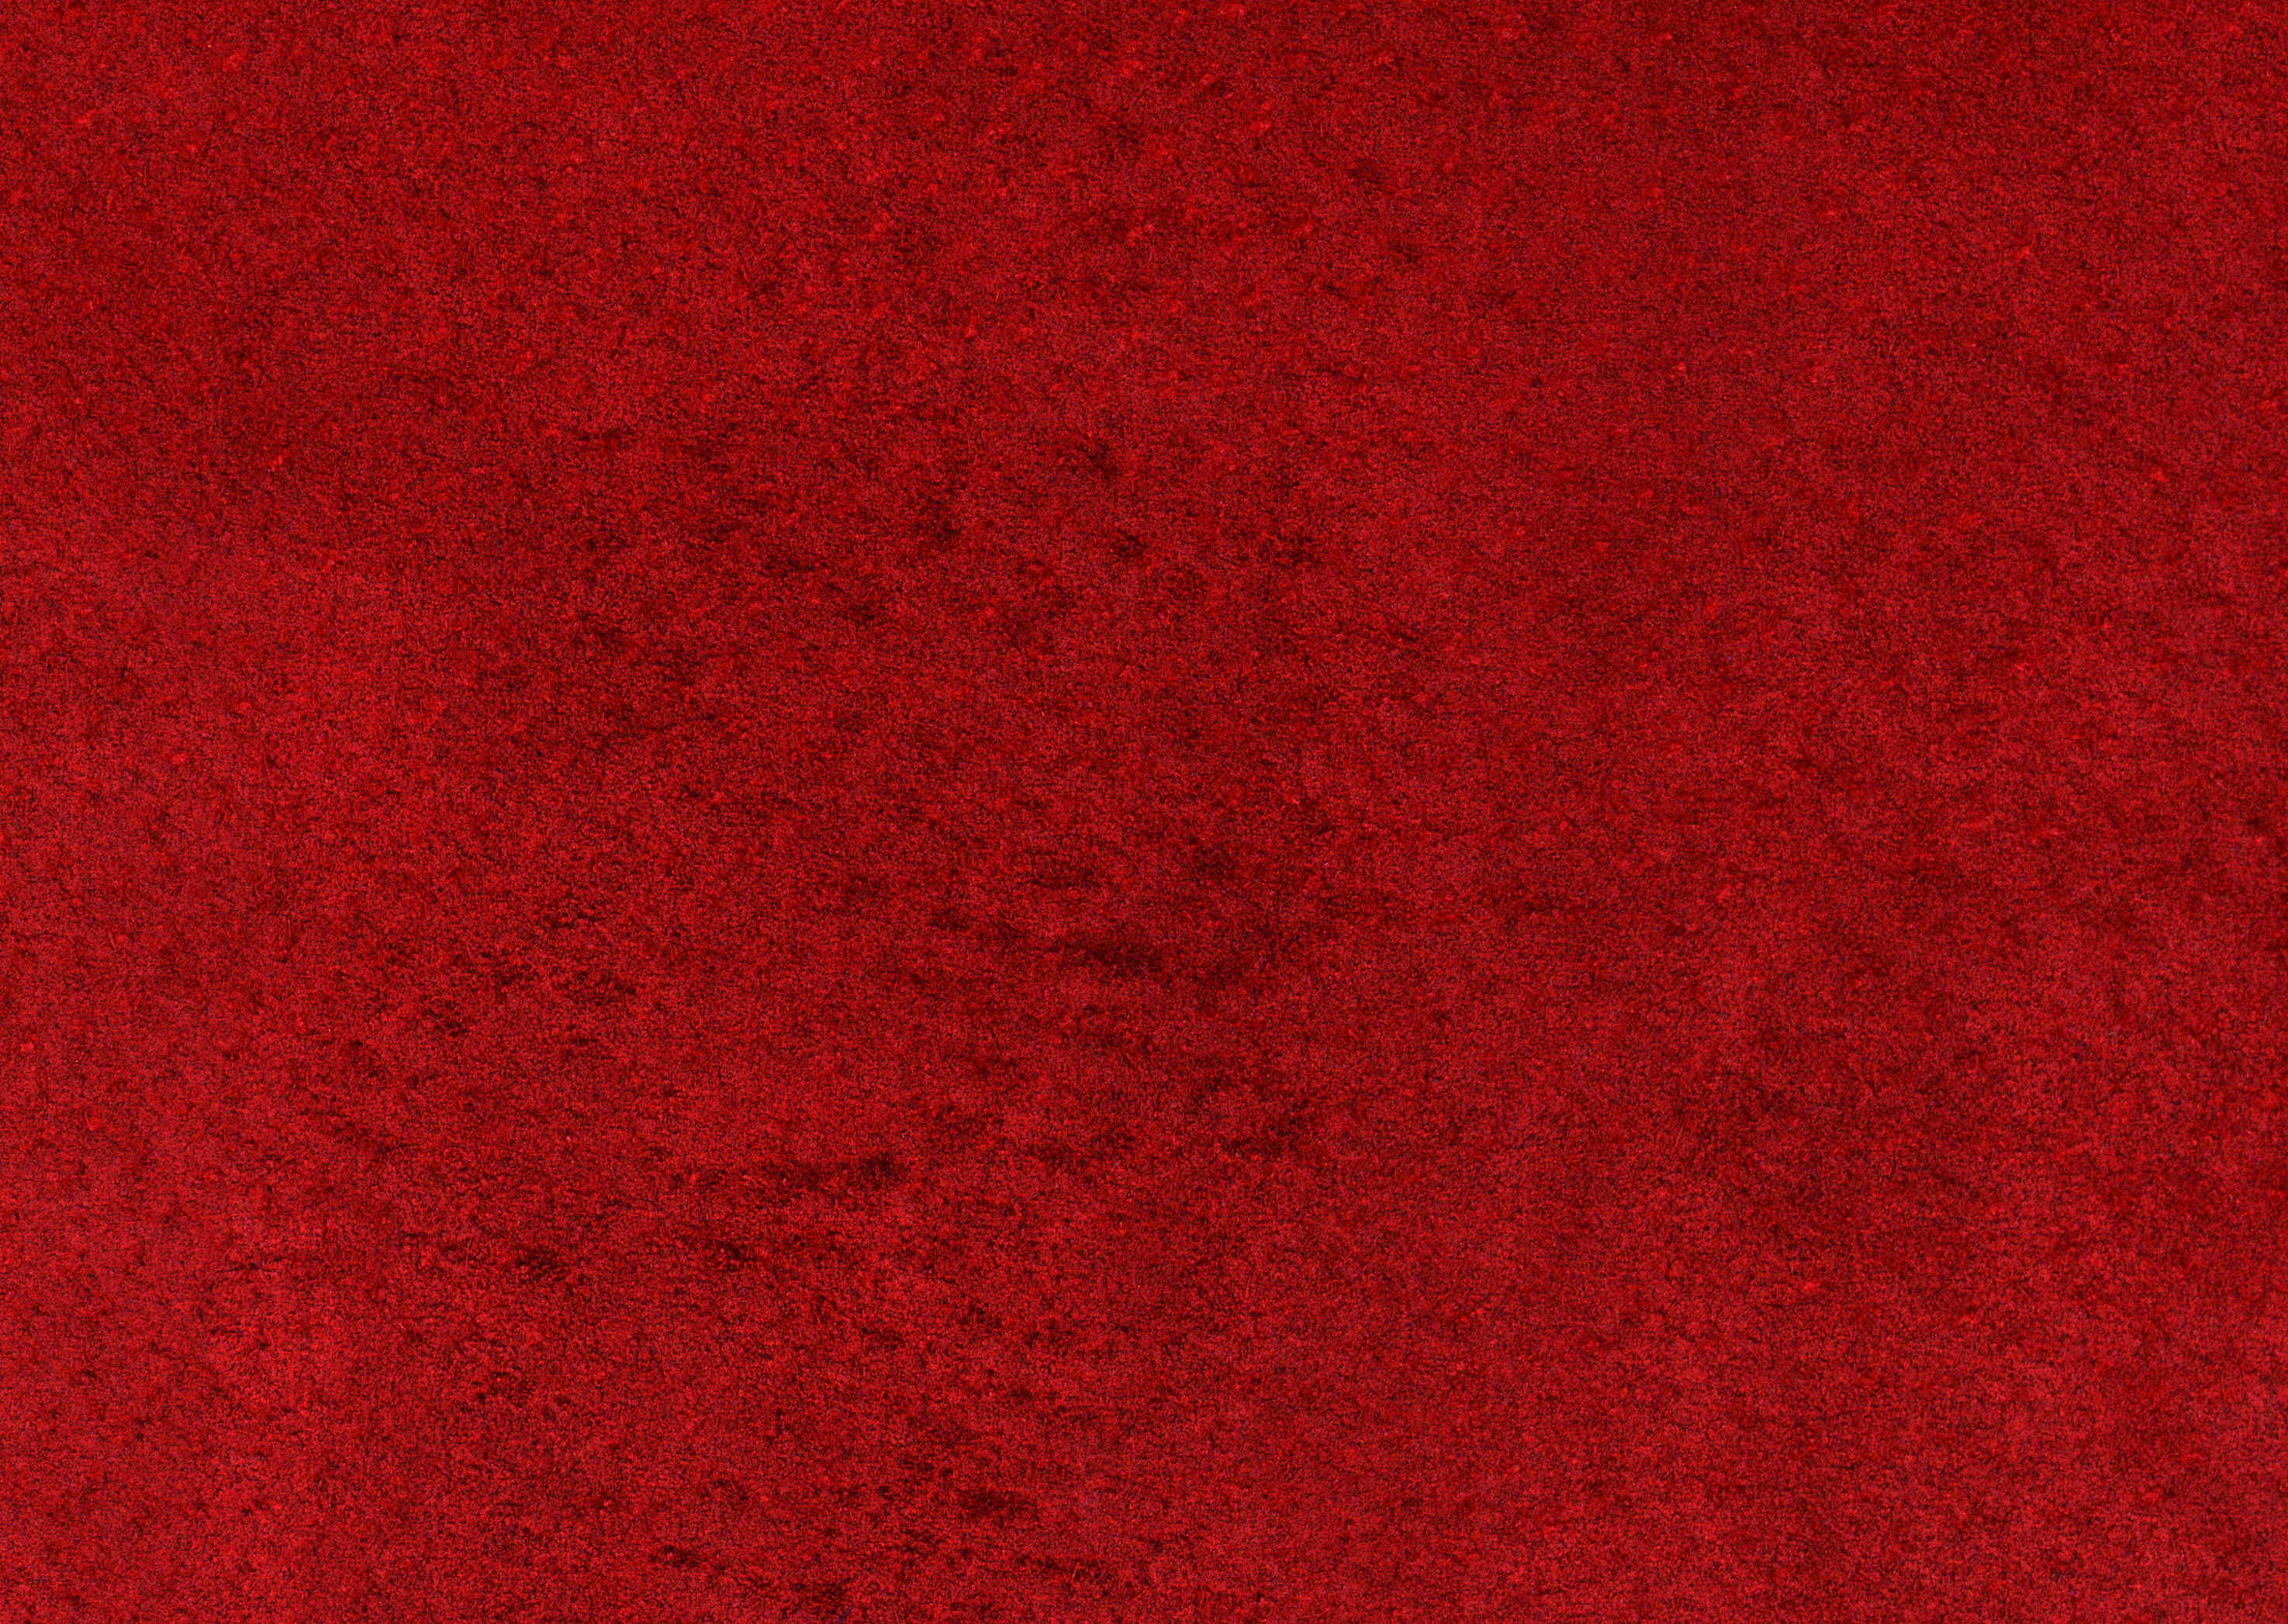 Red leather big textures background image, free picture leather download